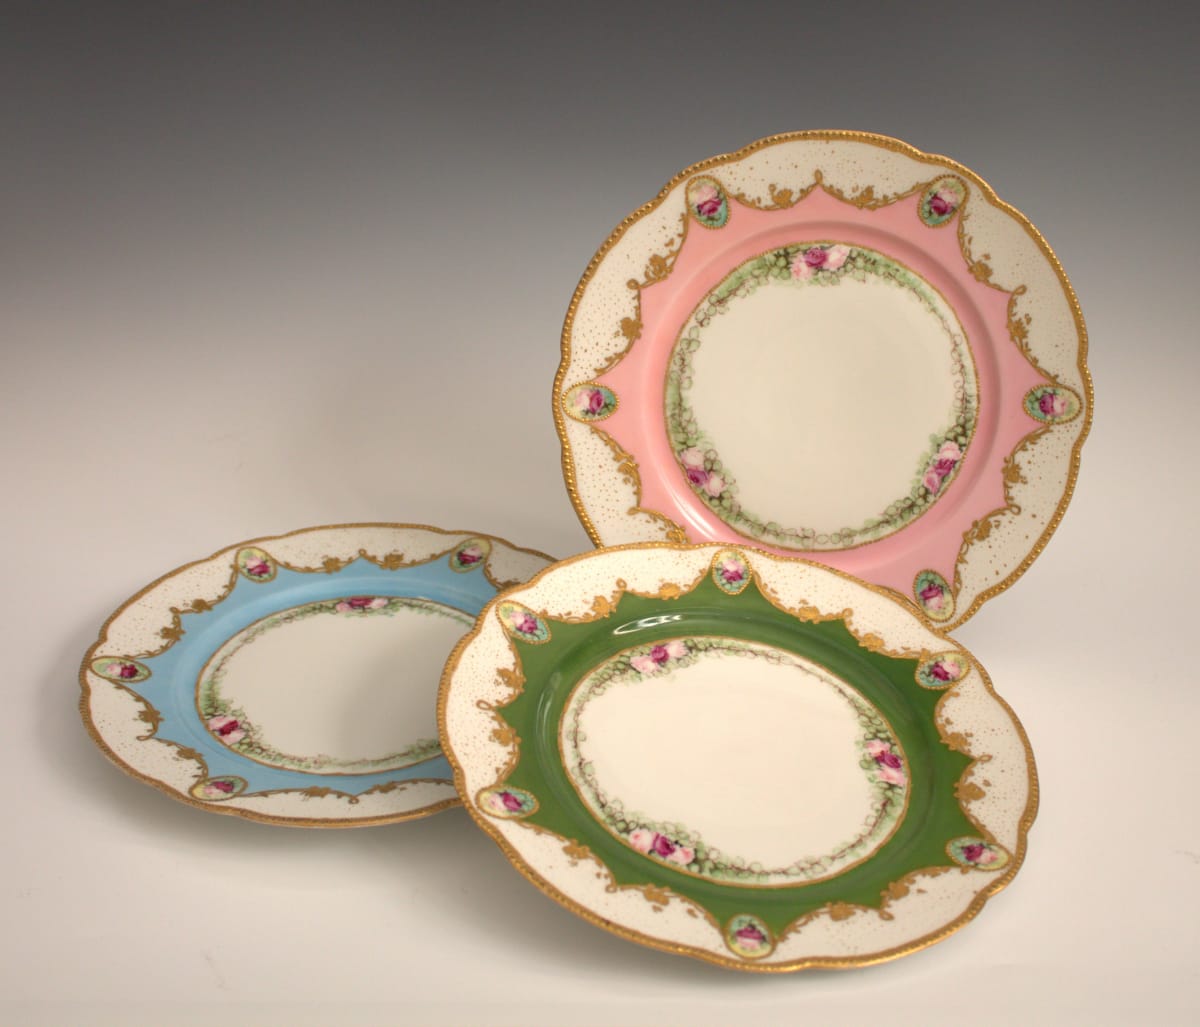 Set of Three Plates by Jean Pouyat 